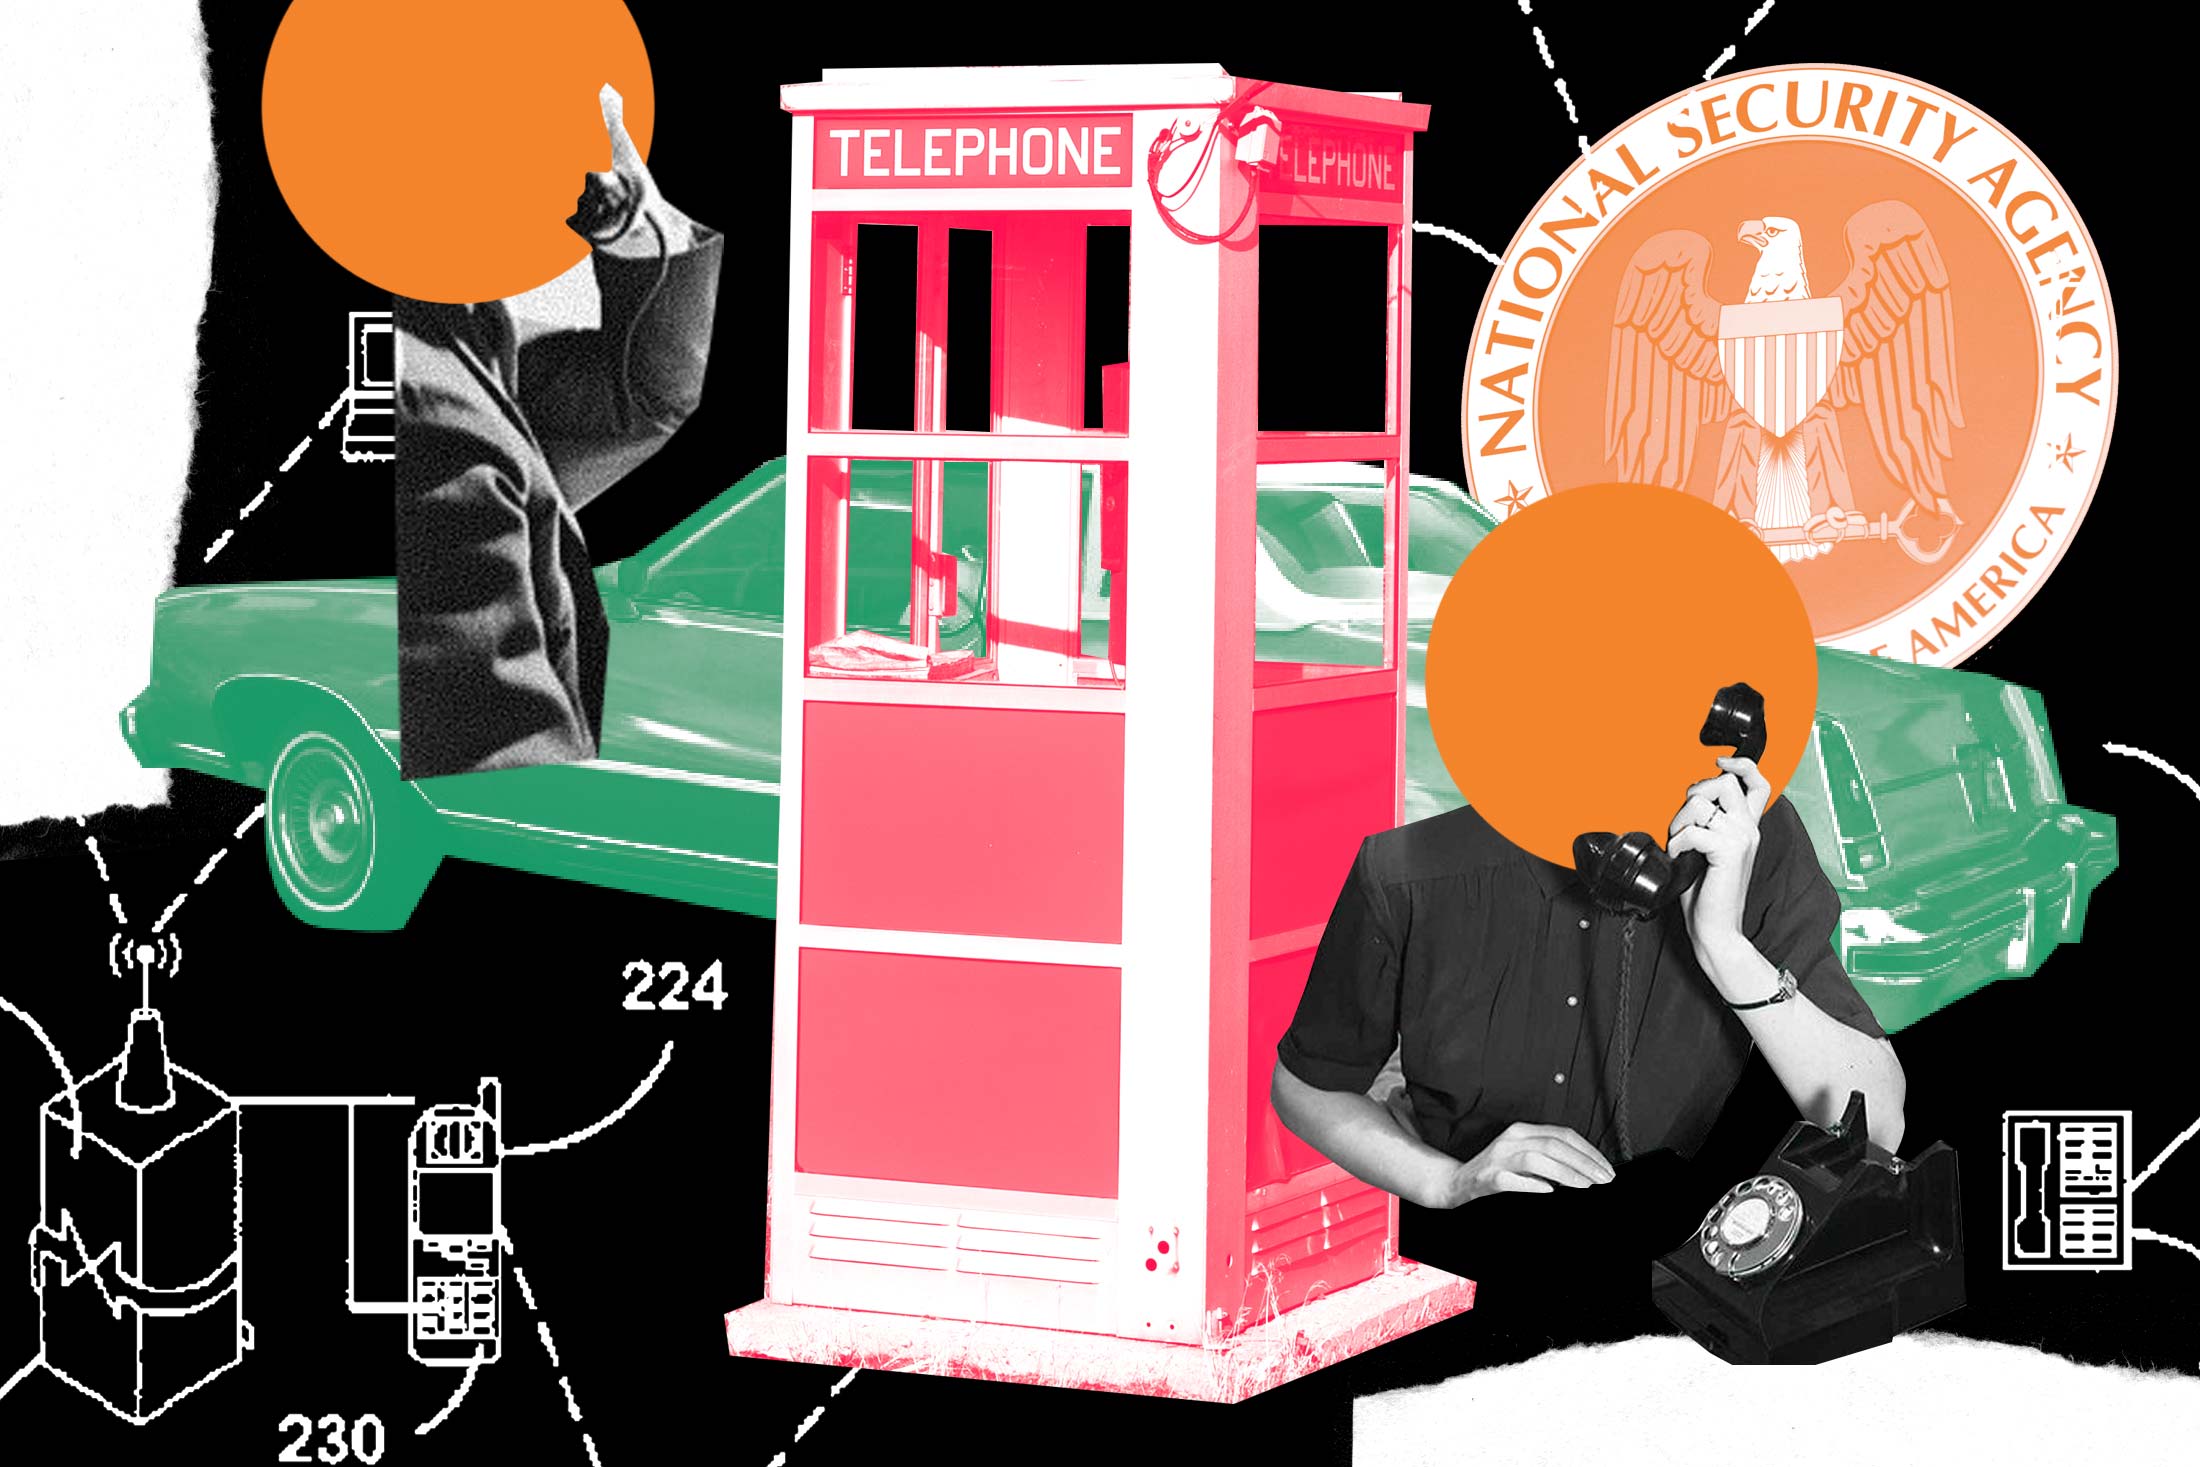 Digital collage of a phone booth, two anonymous people talking on phone, network relay diagrams, and the NSA logo.